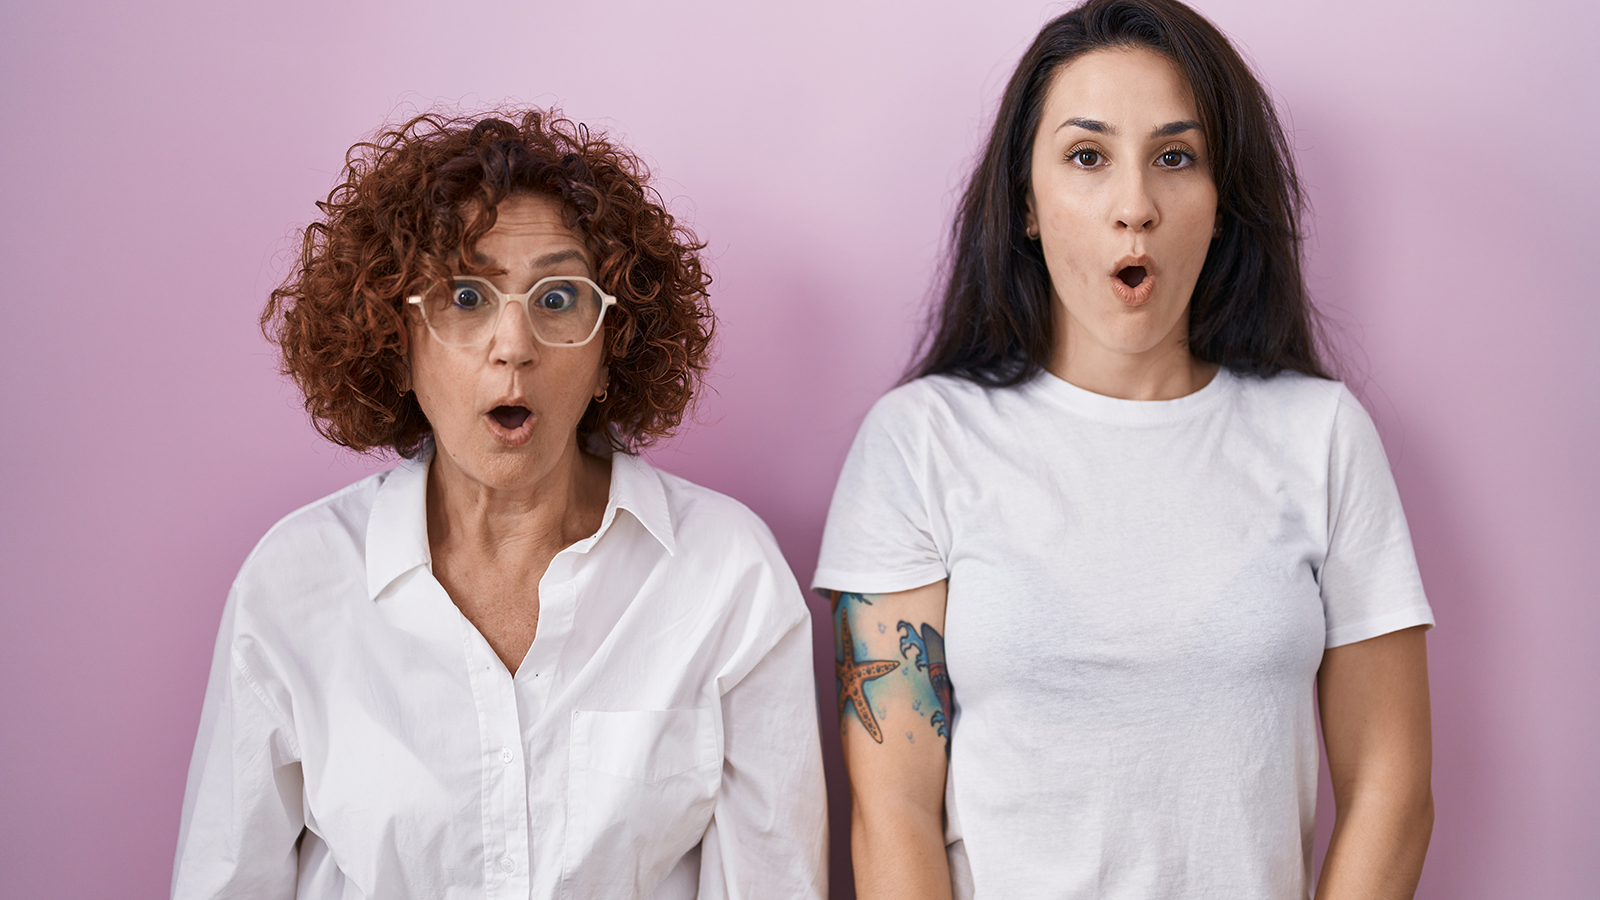 Hispanic mother and daughter wearing casual white t shirt over pink background afraid and shocked with surprise and amazed expression, fear and excited face.